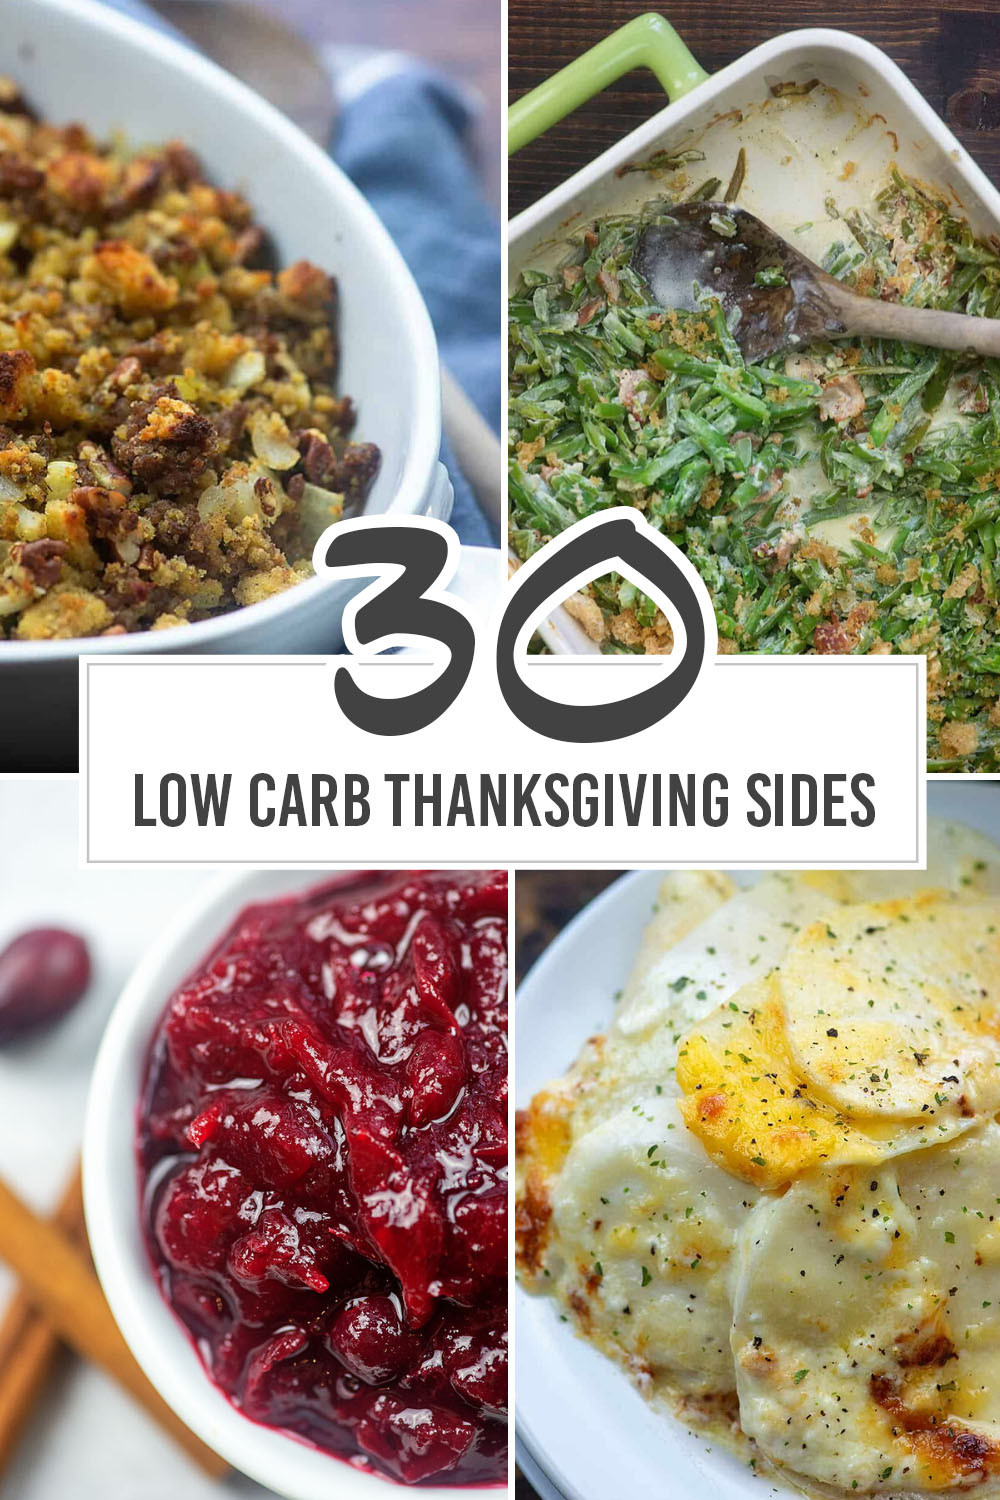 Low Carb Thanksgiving Side Dishes
 Low Carb Side Dishes For Your Thanksgiving Meal